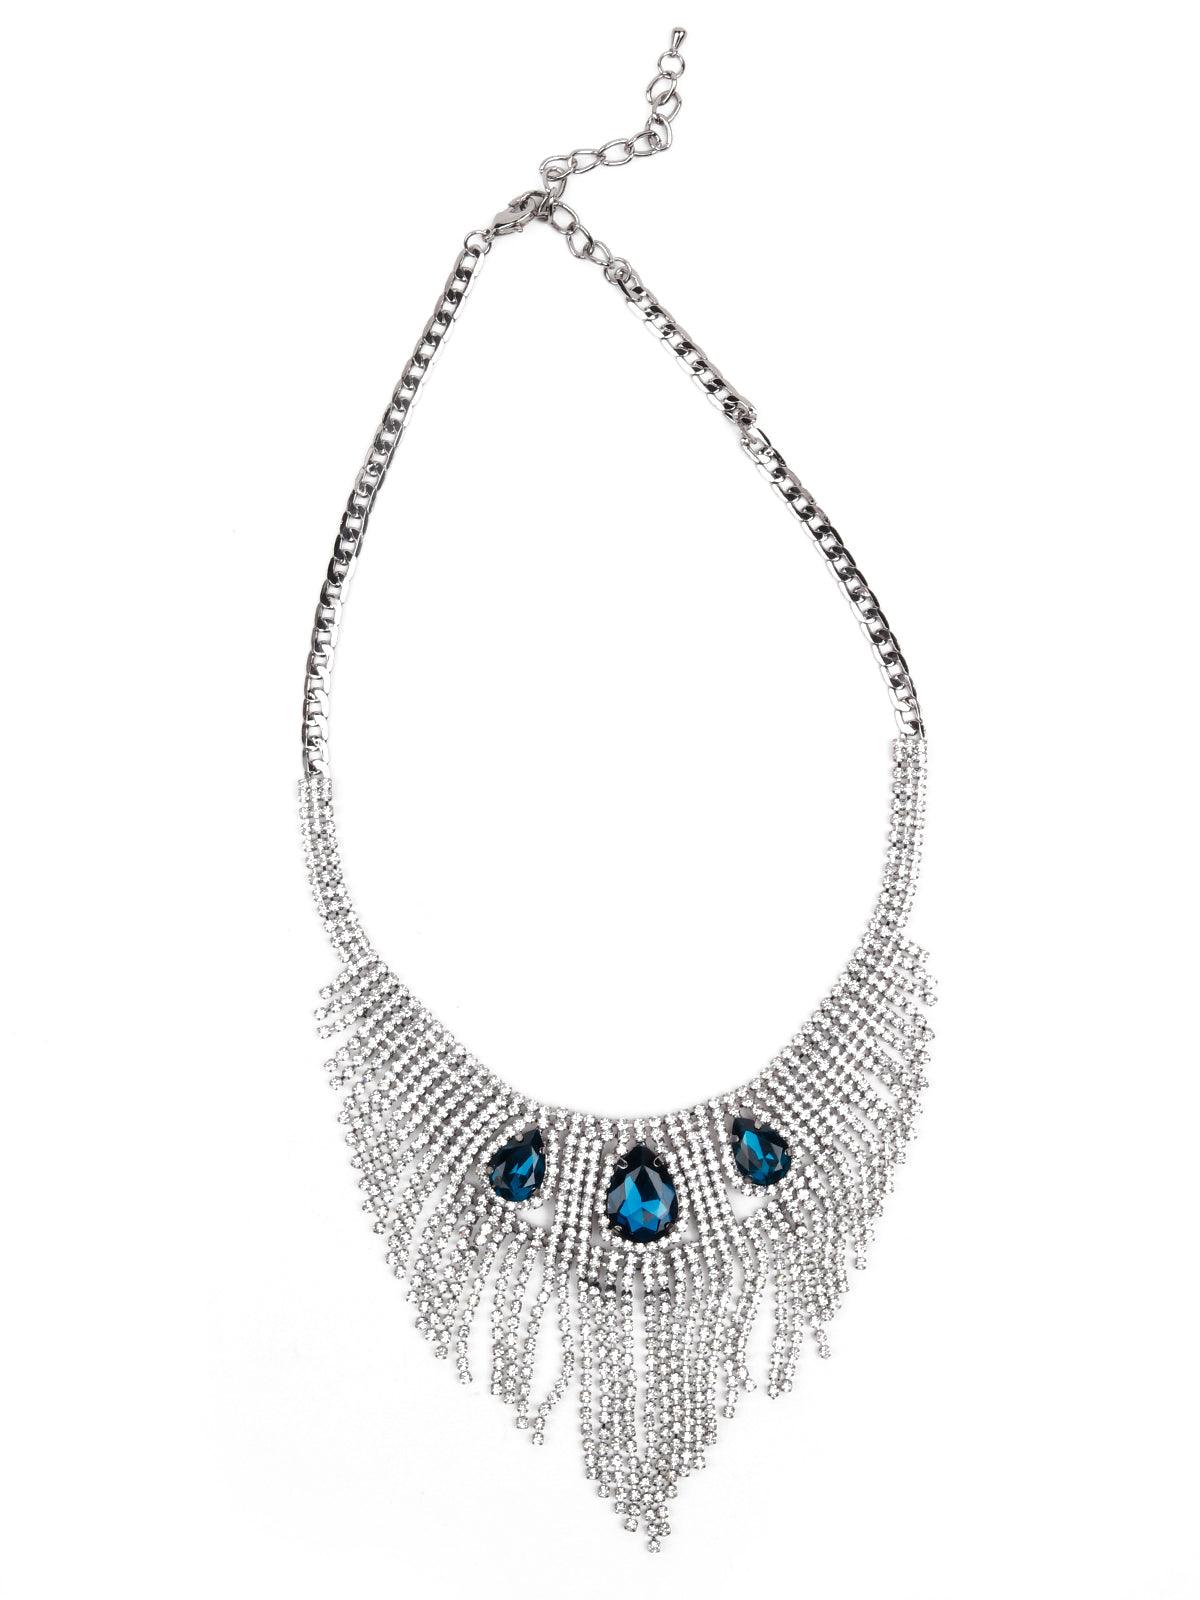 Gorgeous crystal necklace embellished with blue stone - Odette